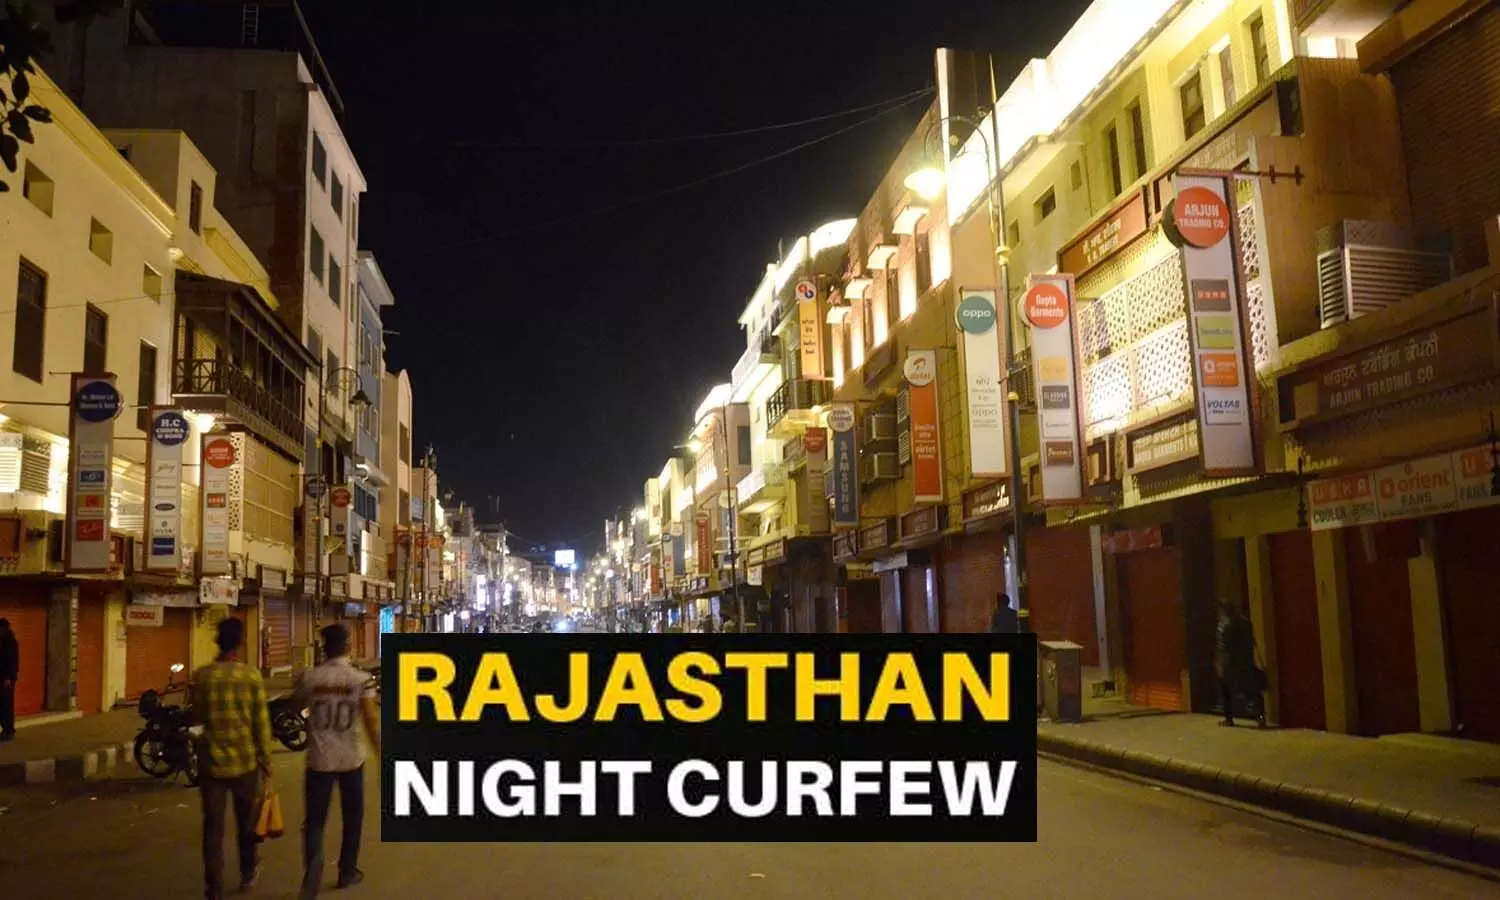 Night Curfew In Rajasthan: Night curfew implemented in Rajasthan, guideline issued, maximum number of cases in Jaipur